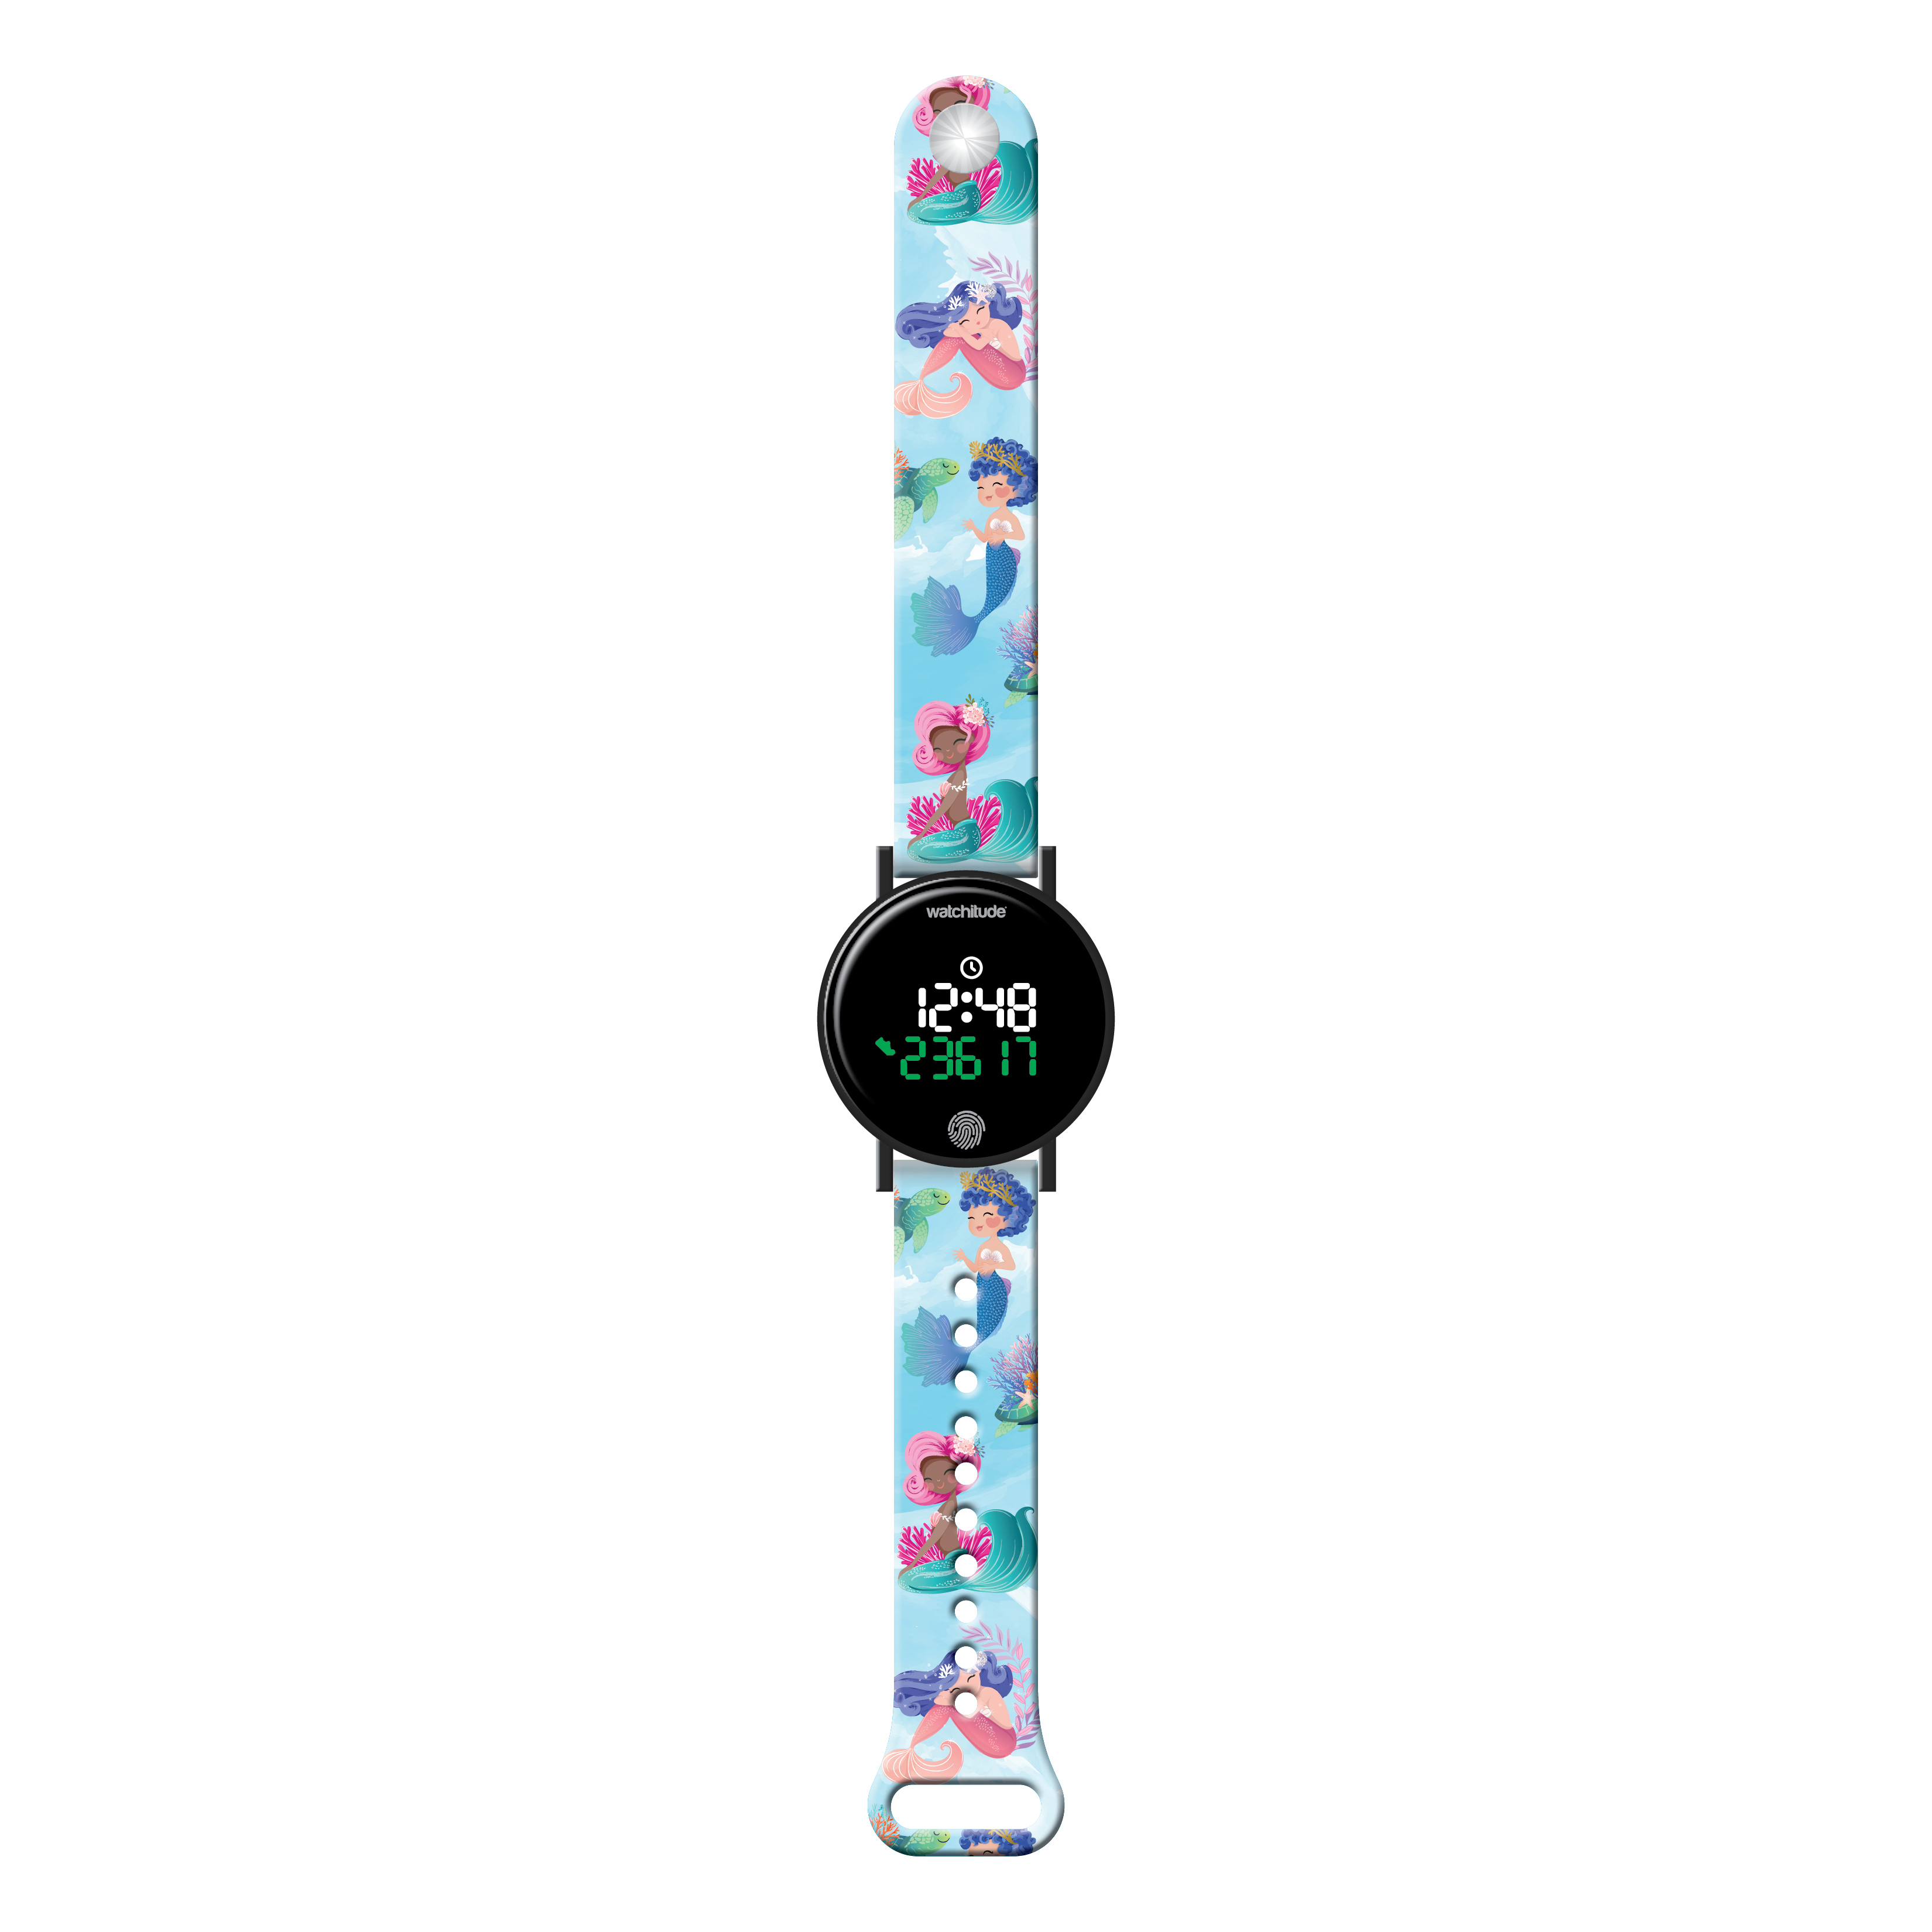 Mermaids Party - Step Counter Watch - Pedometer - Fitness Tracker